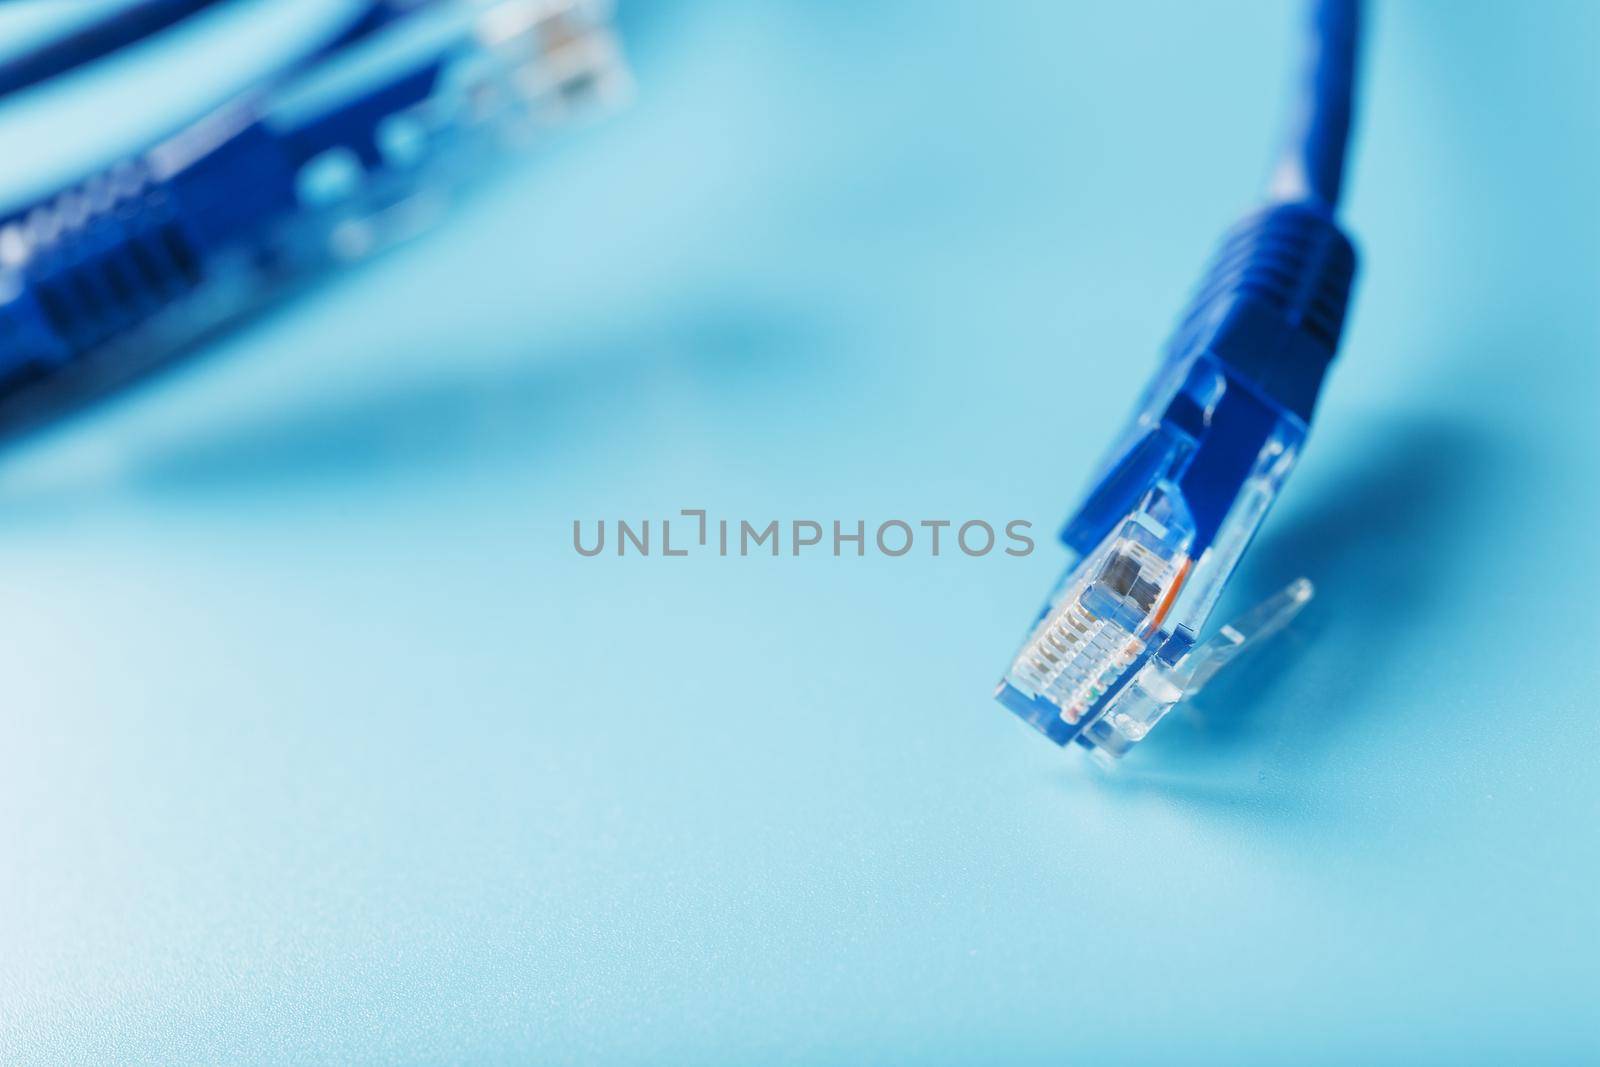 Blue UTP Internet Cable Isolated on a blue background Ethernet Cord by AlexGrec